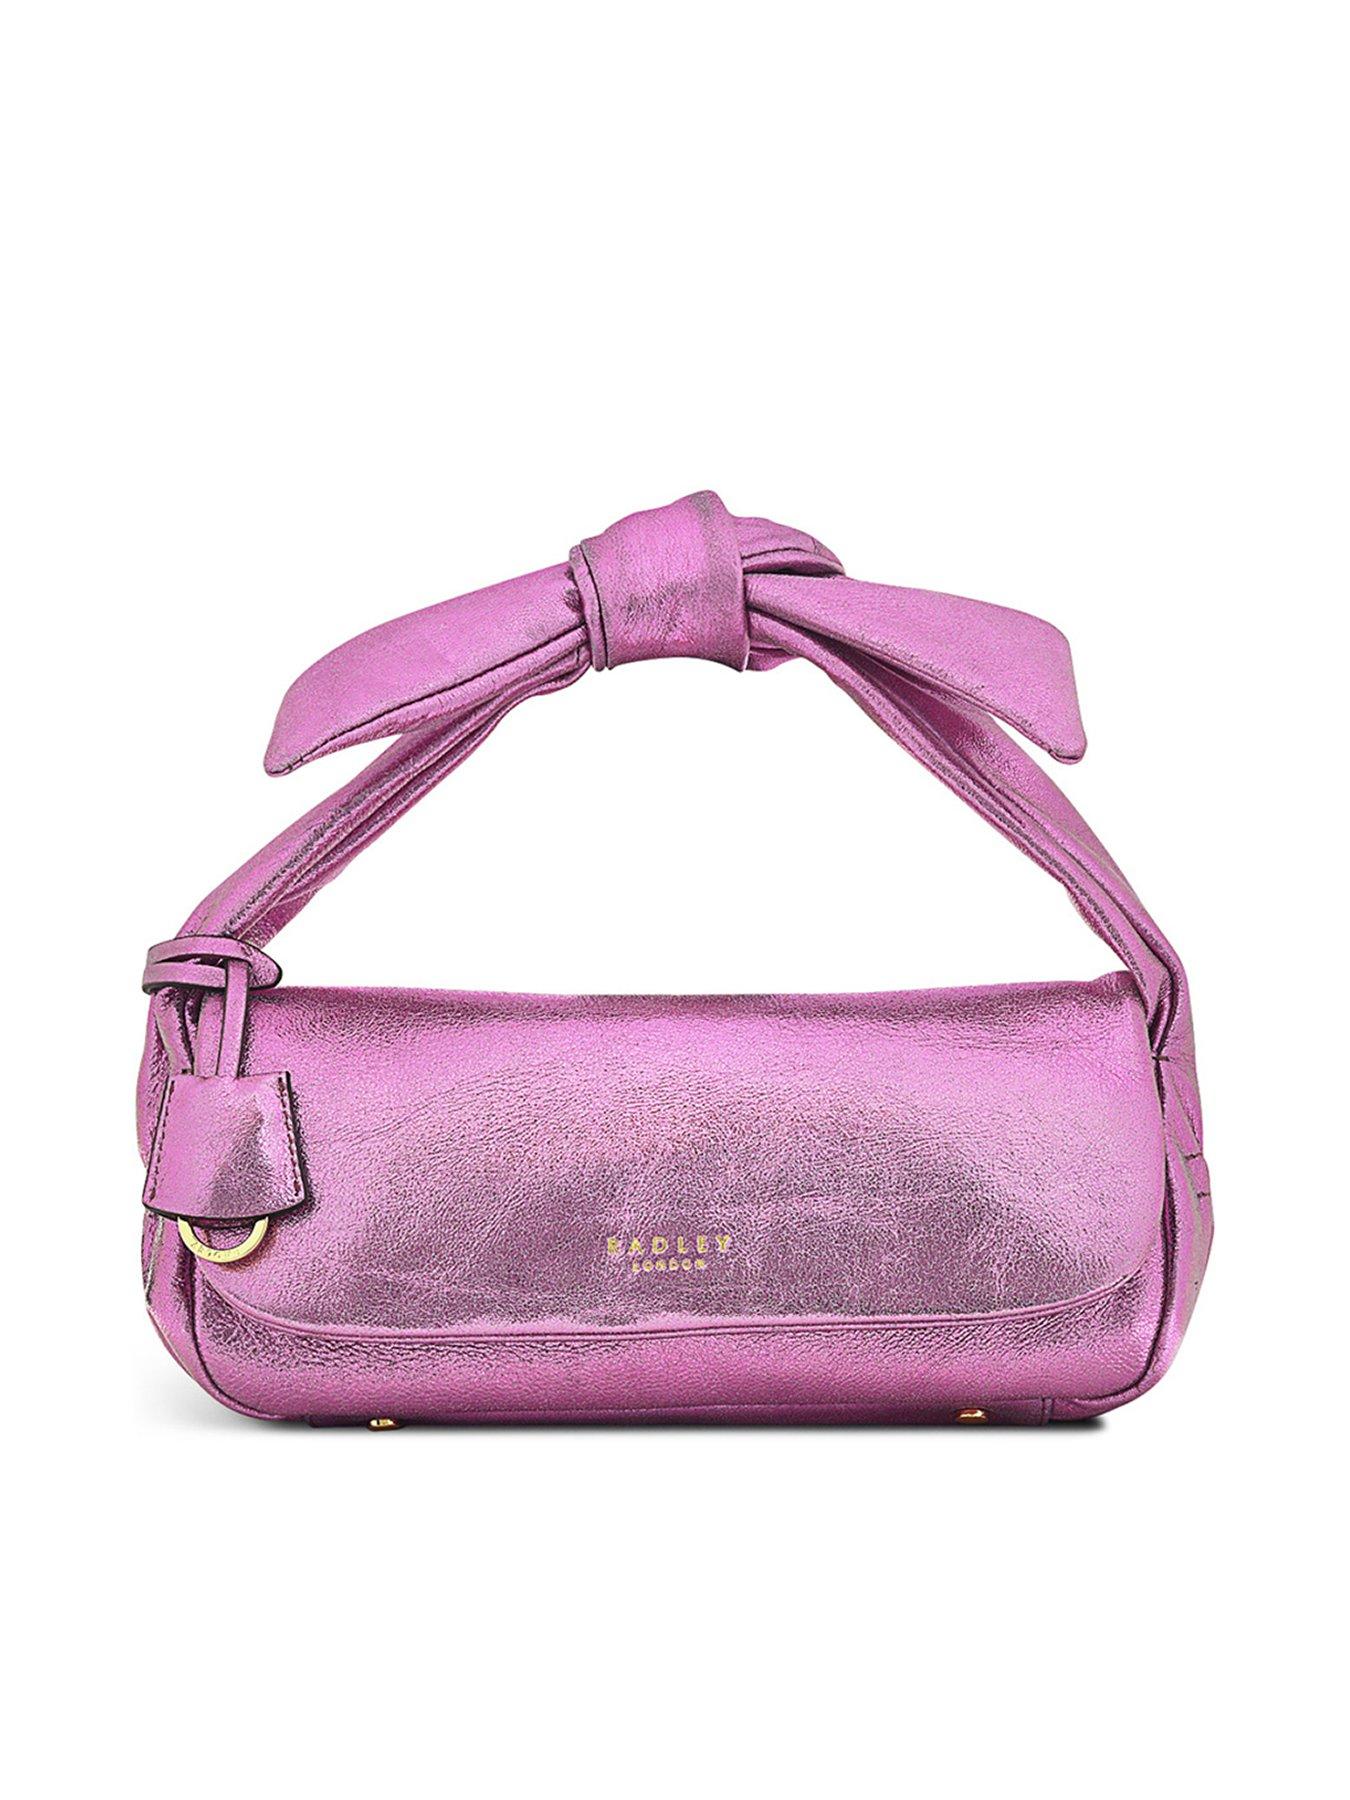 Balmain Logo Leather Clutch Bag in Rose Womens Bags Clutches and evening bags - Save 7% Pink 